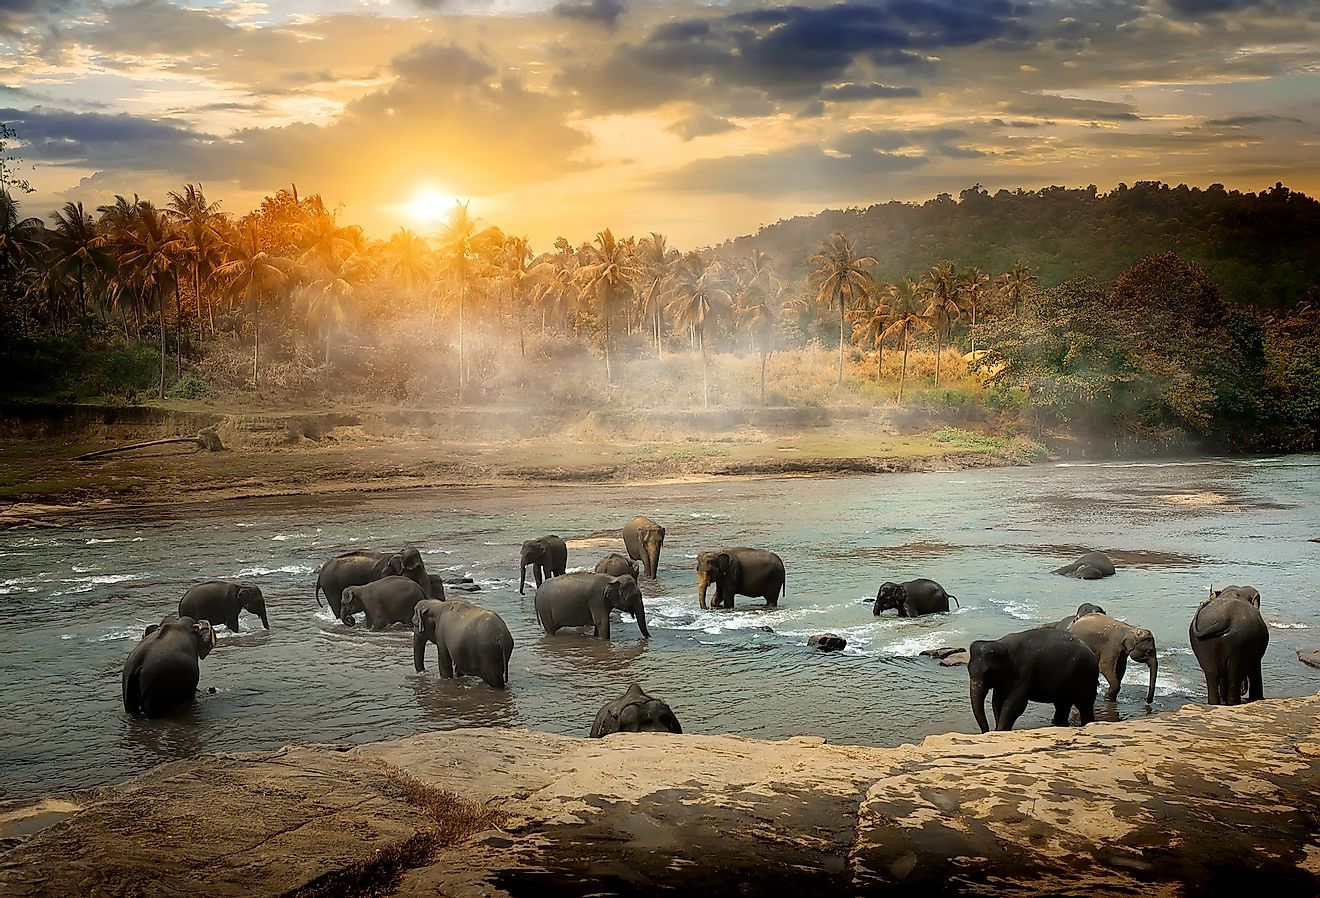 A herd of bathing elephants in the river. Image credit: Givaga/Shutterstock.com